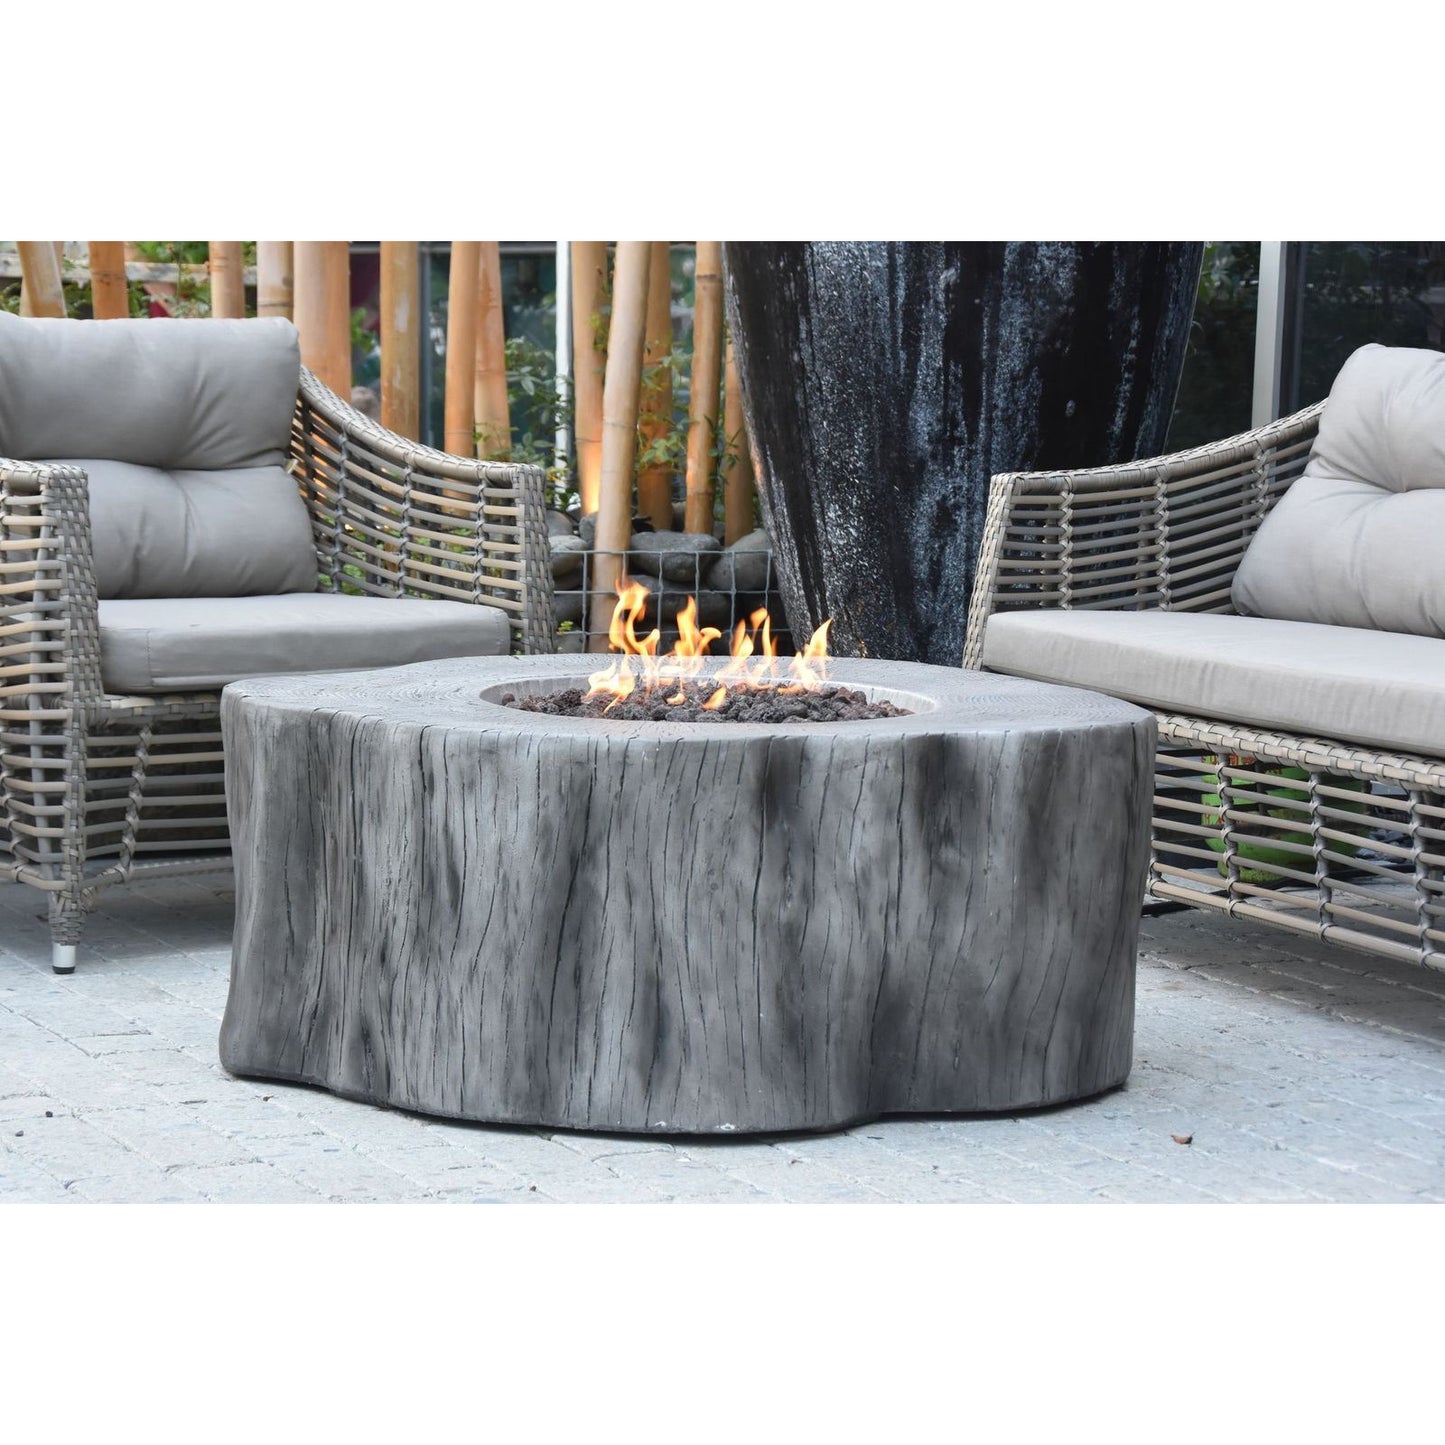 Elementi Manchester Fire Table OFG145 freeshipping - Luxury Tech Inc.